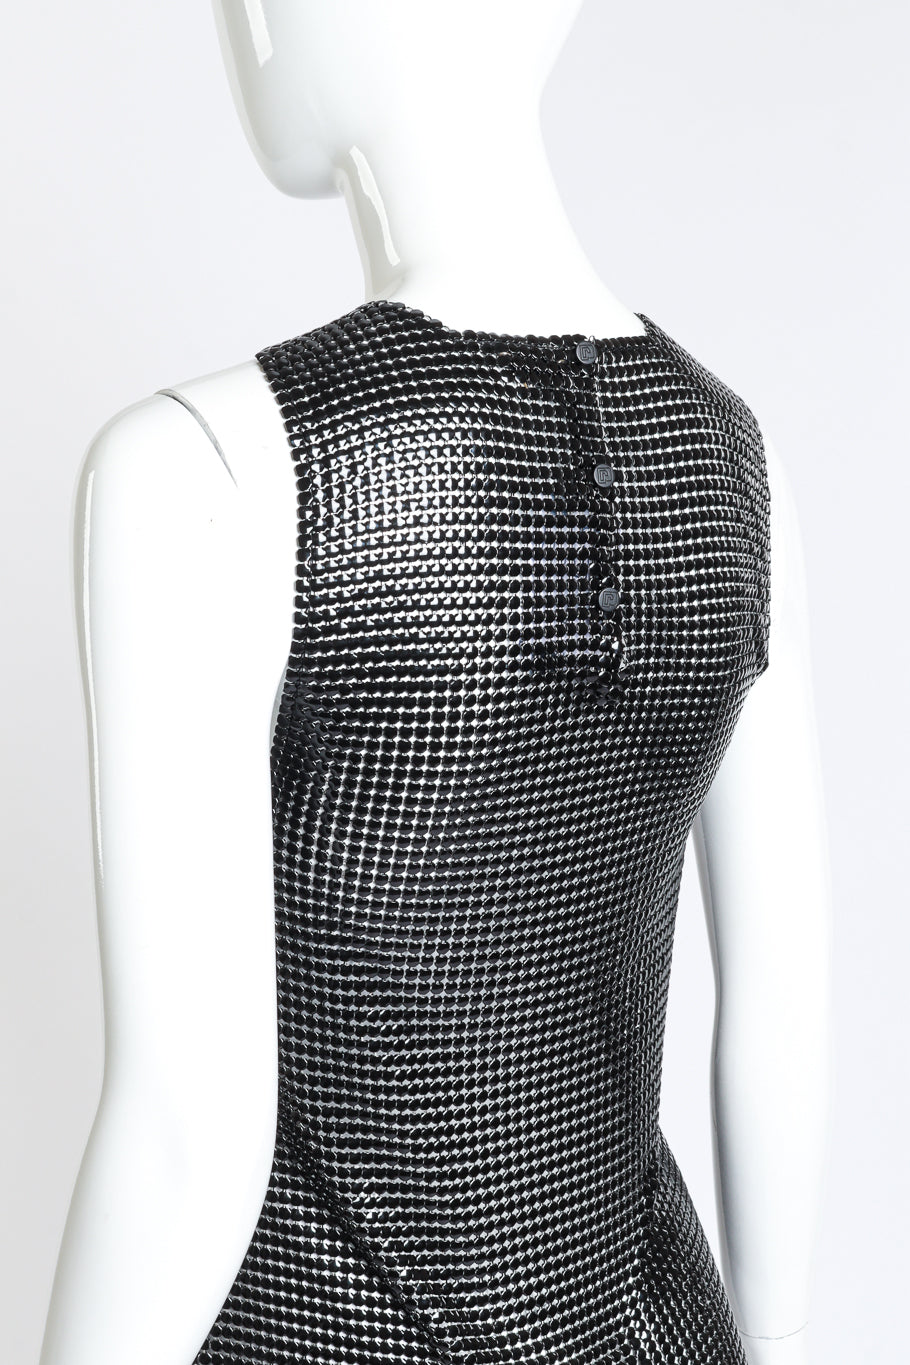 Paco Rabanne Racer Front Chainmail Dress back on mannequin closeup @recess la